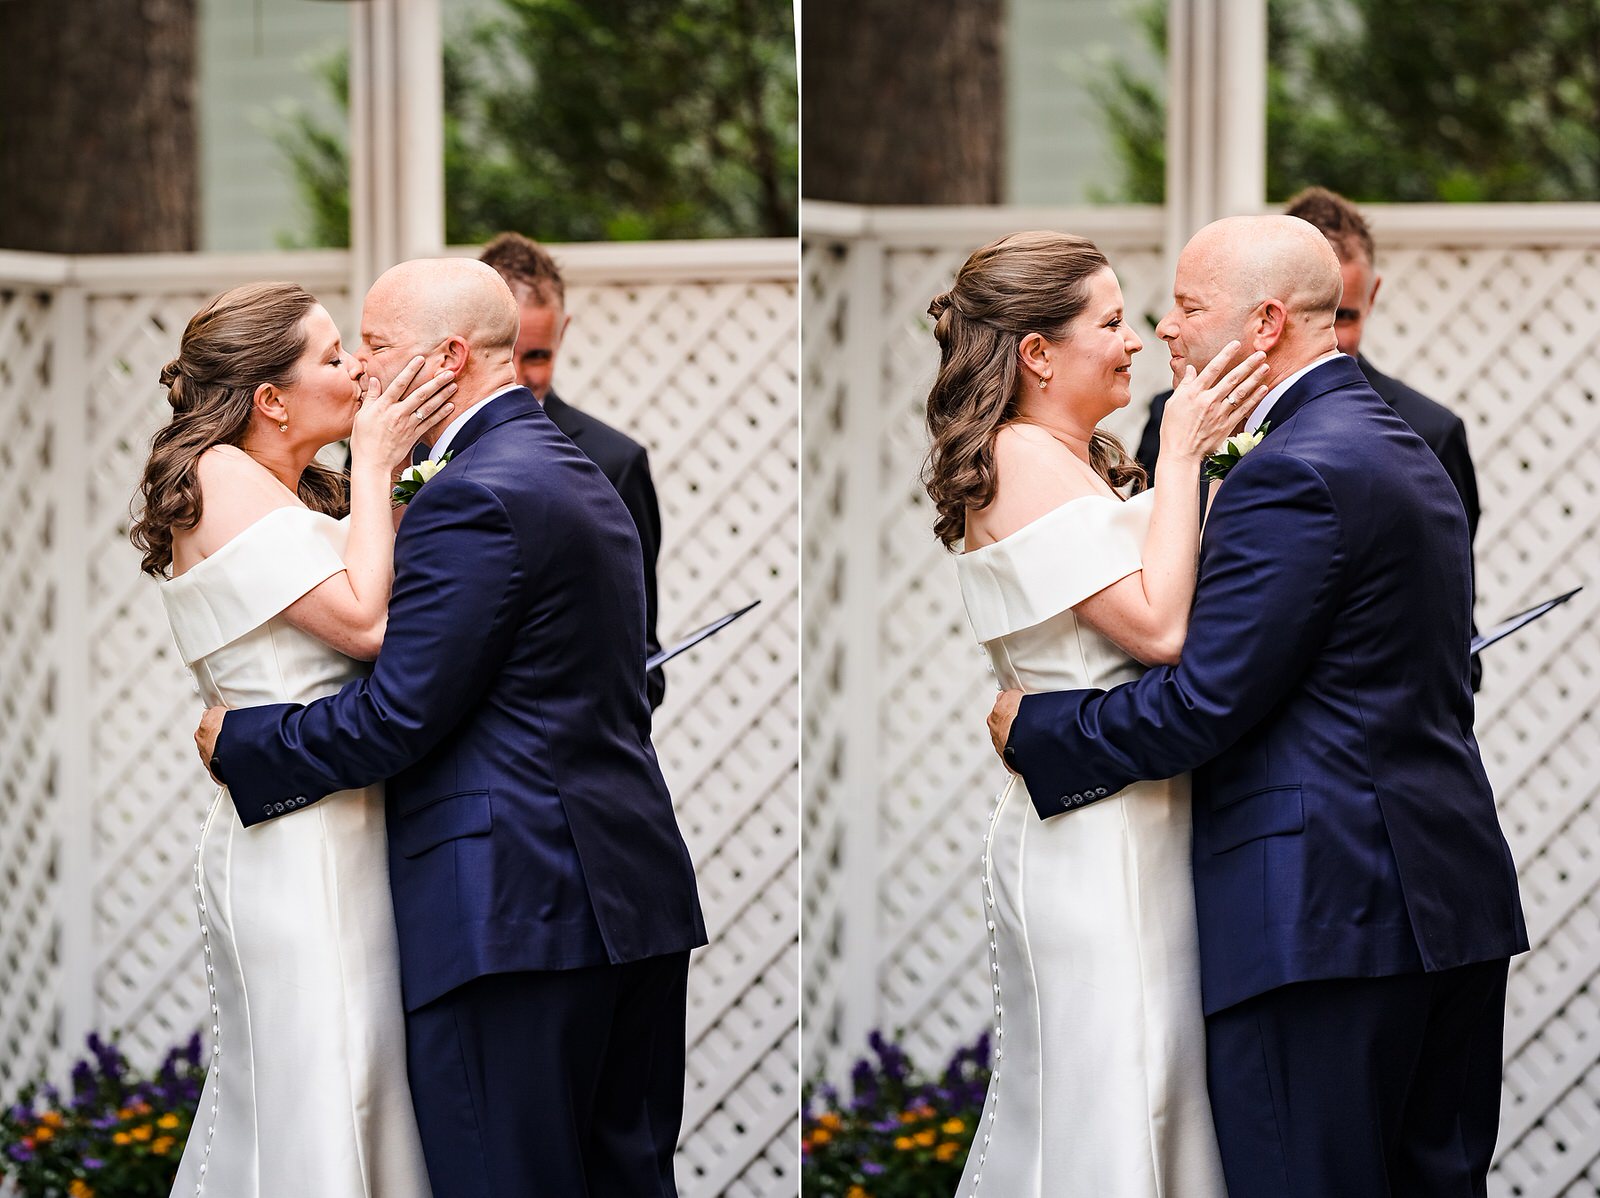 Bride and groom share their first kiss at the end of their wedding ceremony in a Raleigh backyard